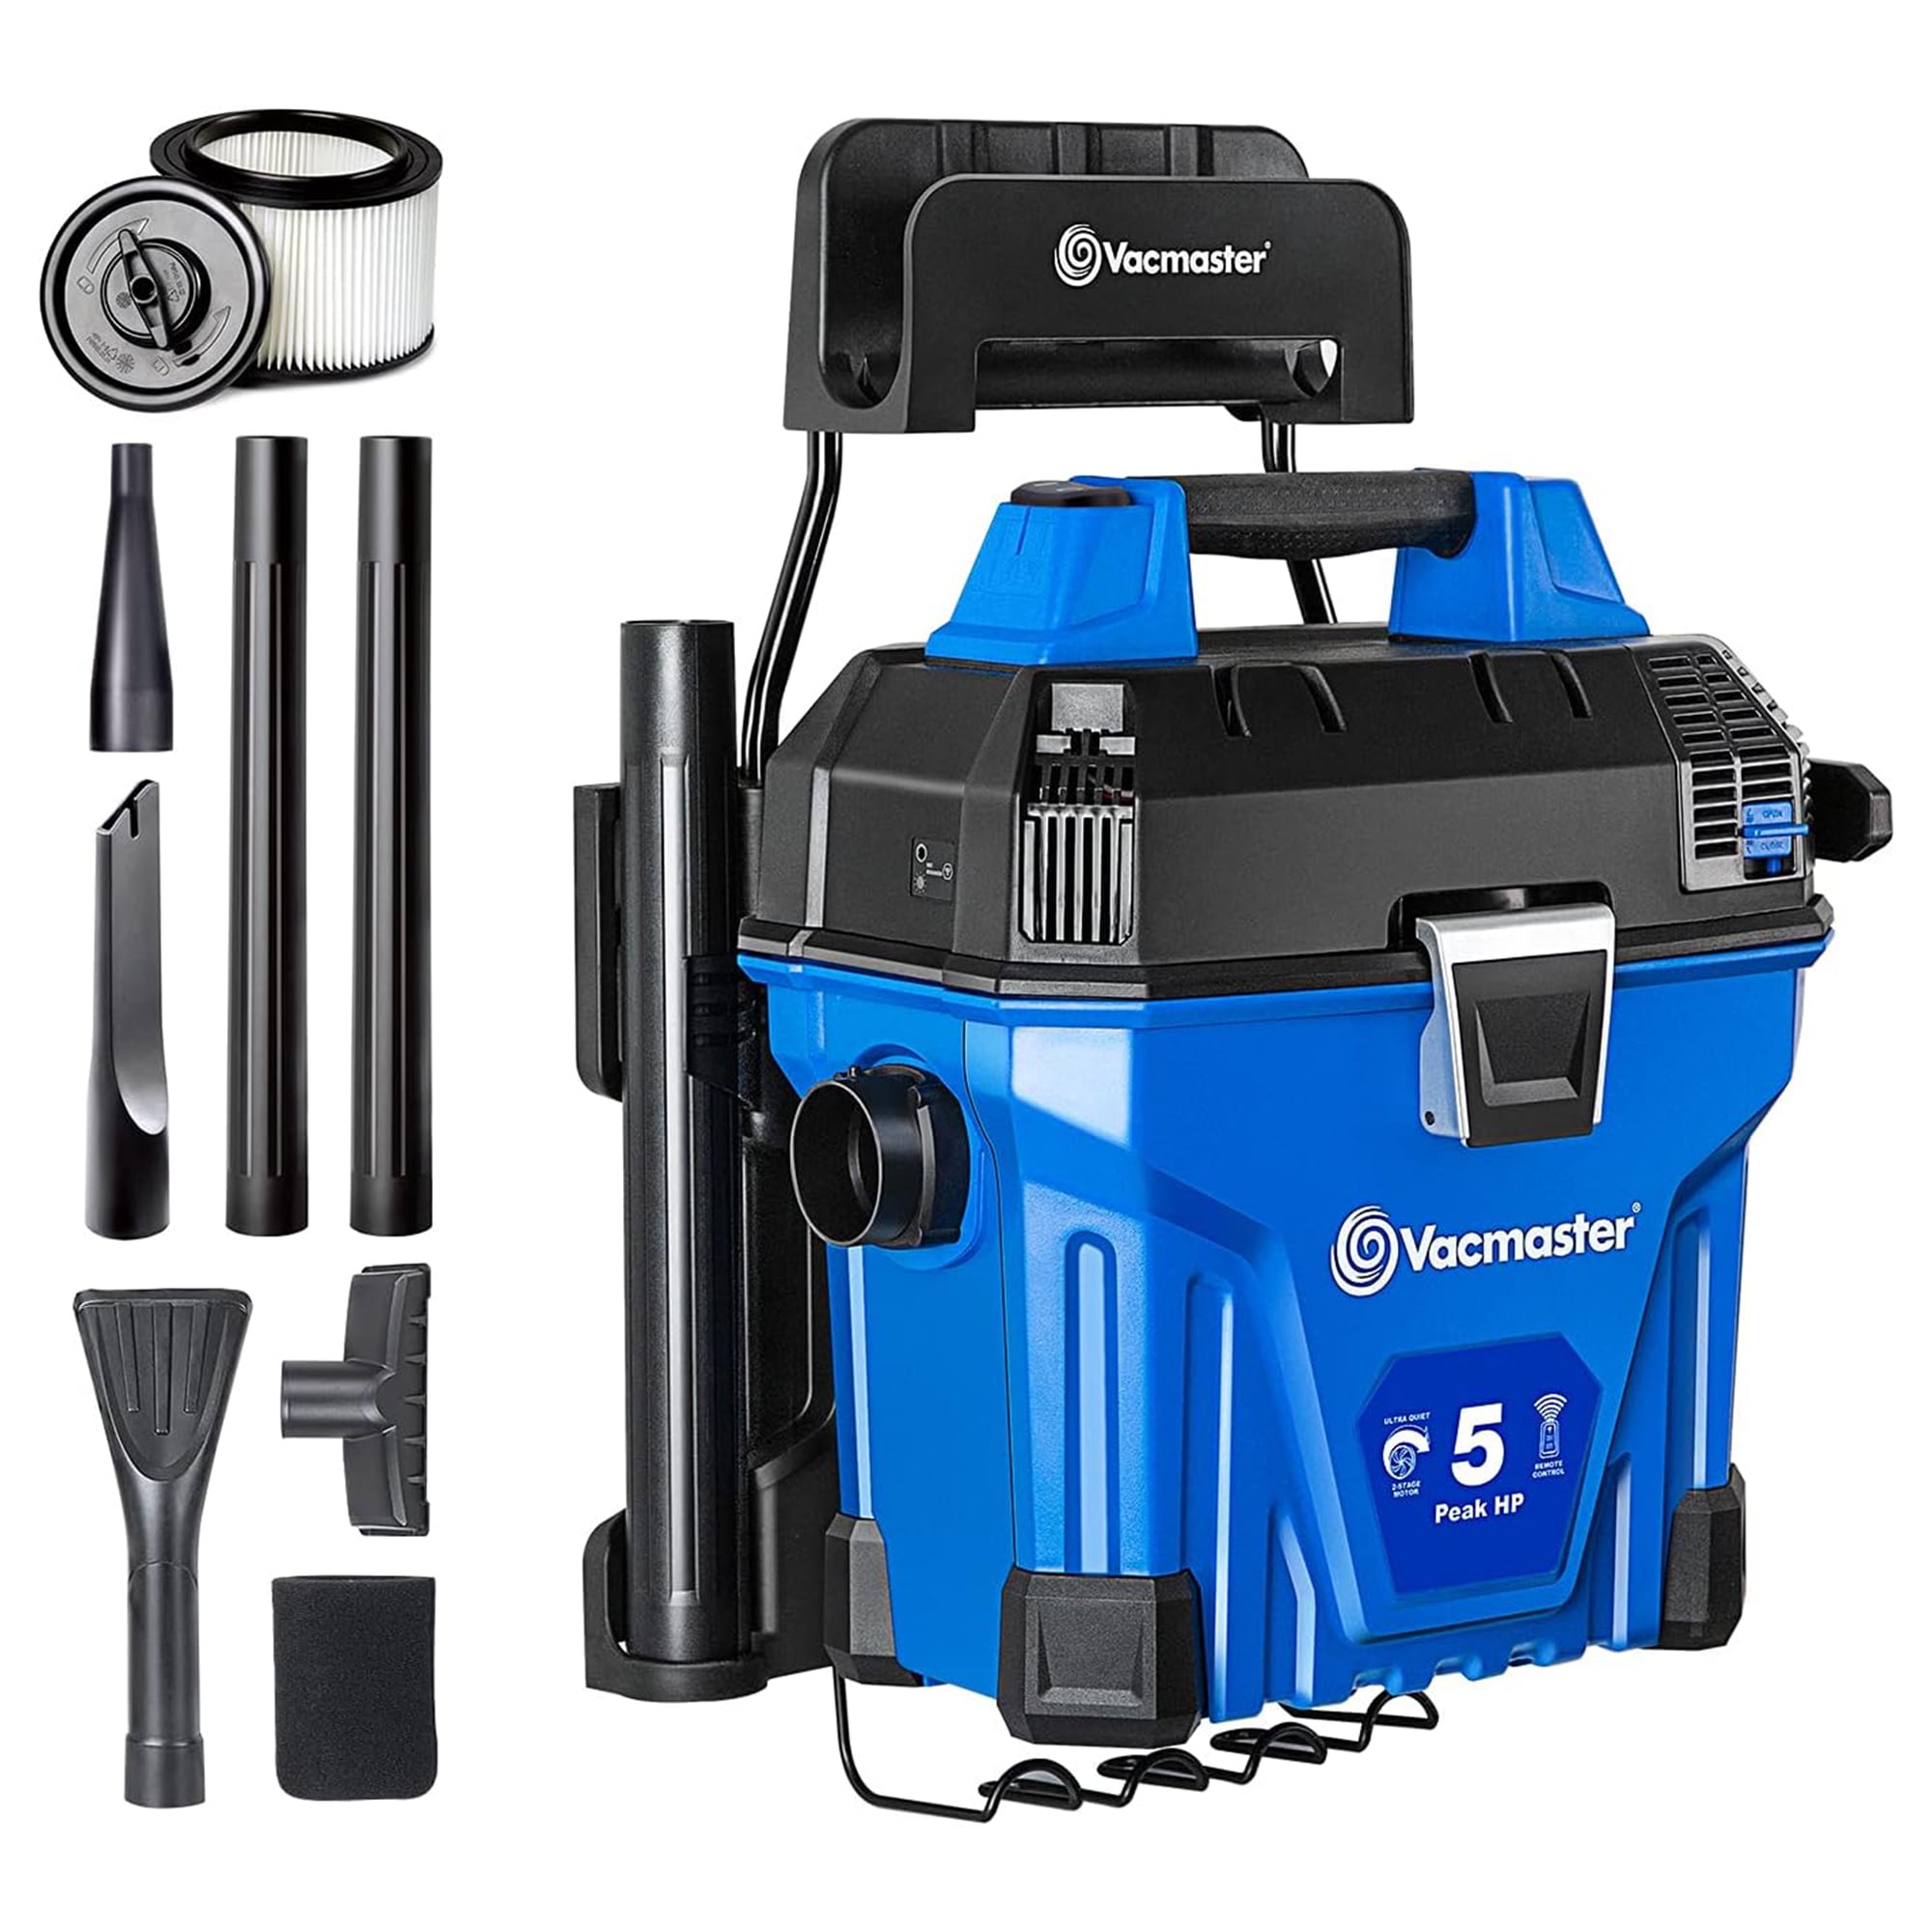 Vacmaster 5 Gallon 5 Peak HP Poly Wall Mount Wet/Dry Vacuum with Remote Control Operation, VWMB508